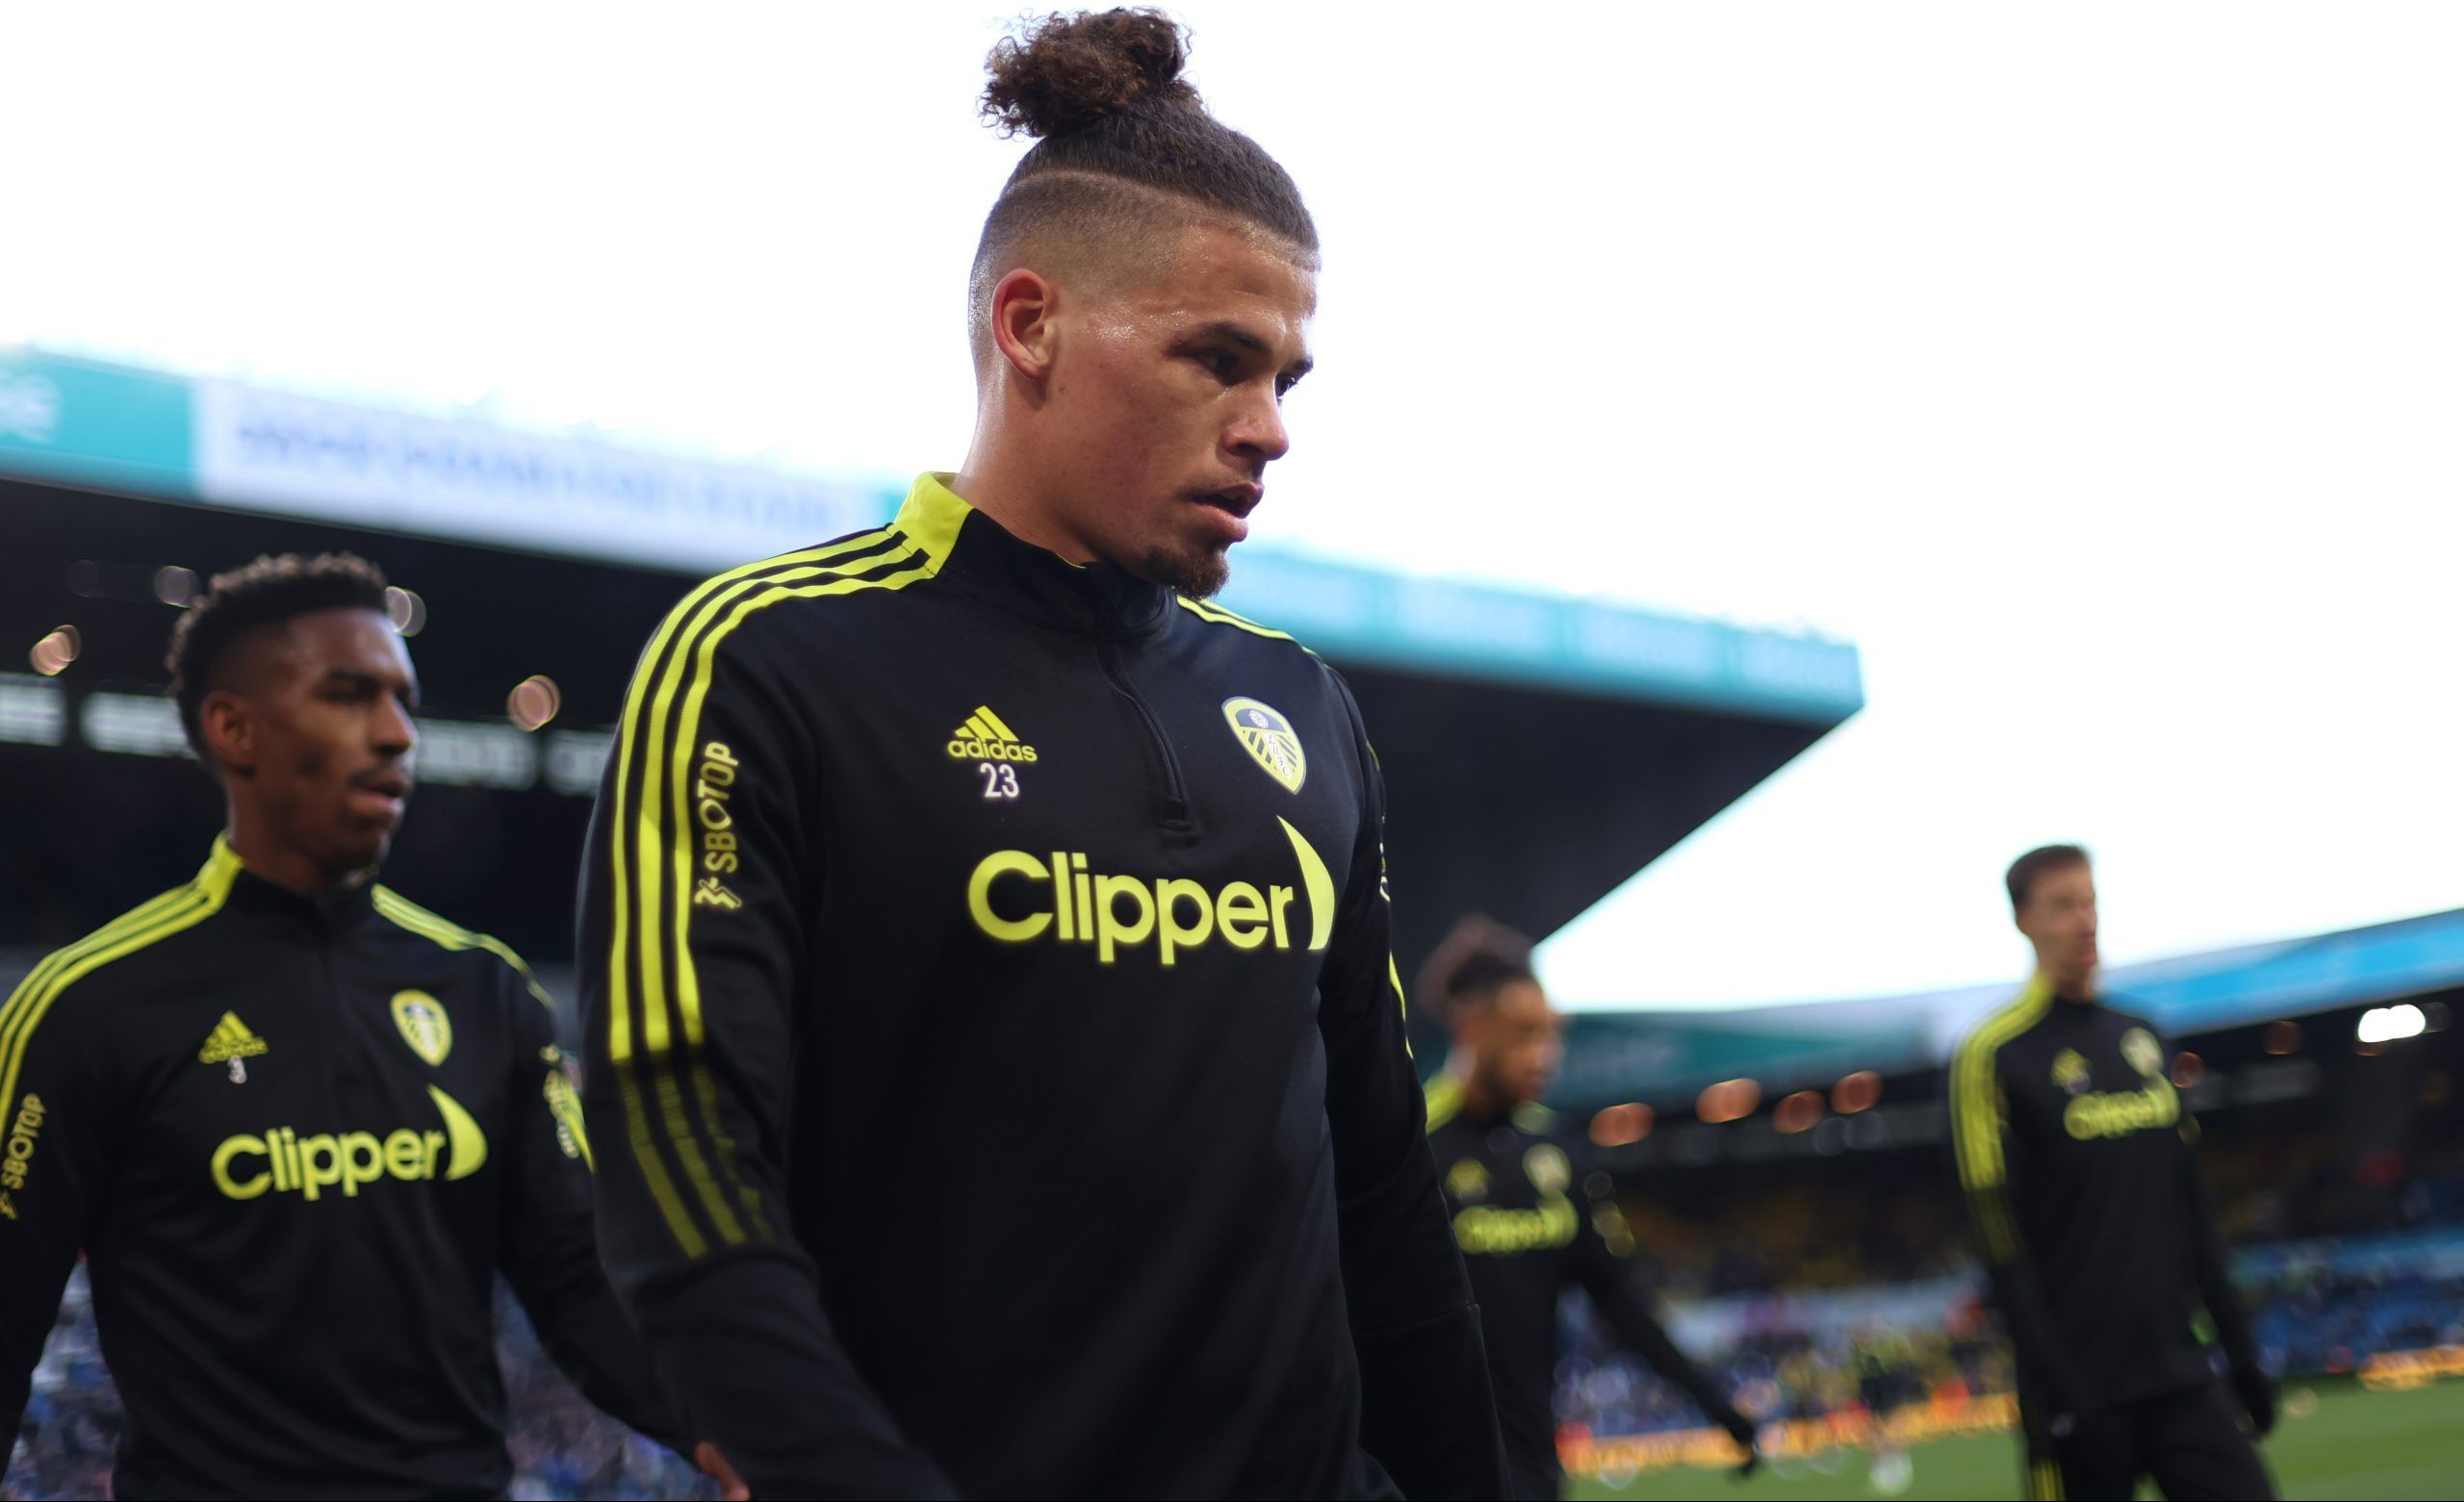 Soccer Football - Premier League - Leeds United v Brentford - Elland Road, Leeds, Britain - December 5, 2021 Leeds United's Kalvin Phillips during the warm up before the match Action Images via Reuters/Carl Recine EDITORIAL USE ONLY. No use with unauthorized audio, video, data, fixture lists, club/league logos or 'live' services. Online in-match use limited to 75 images, no video emulation. No use in betting, games or single club /league/player publications.  Please contact your account represen